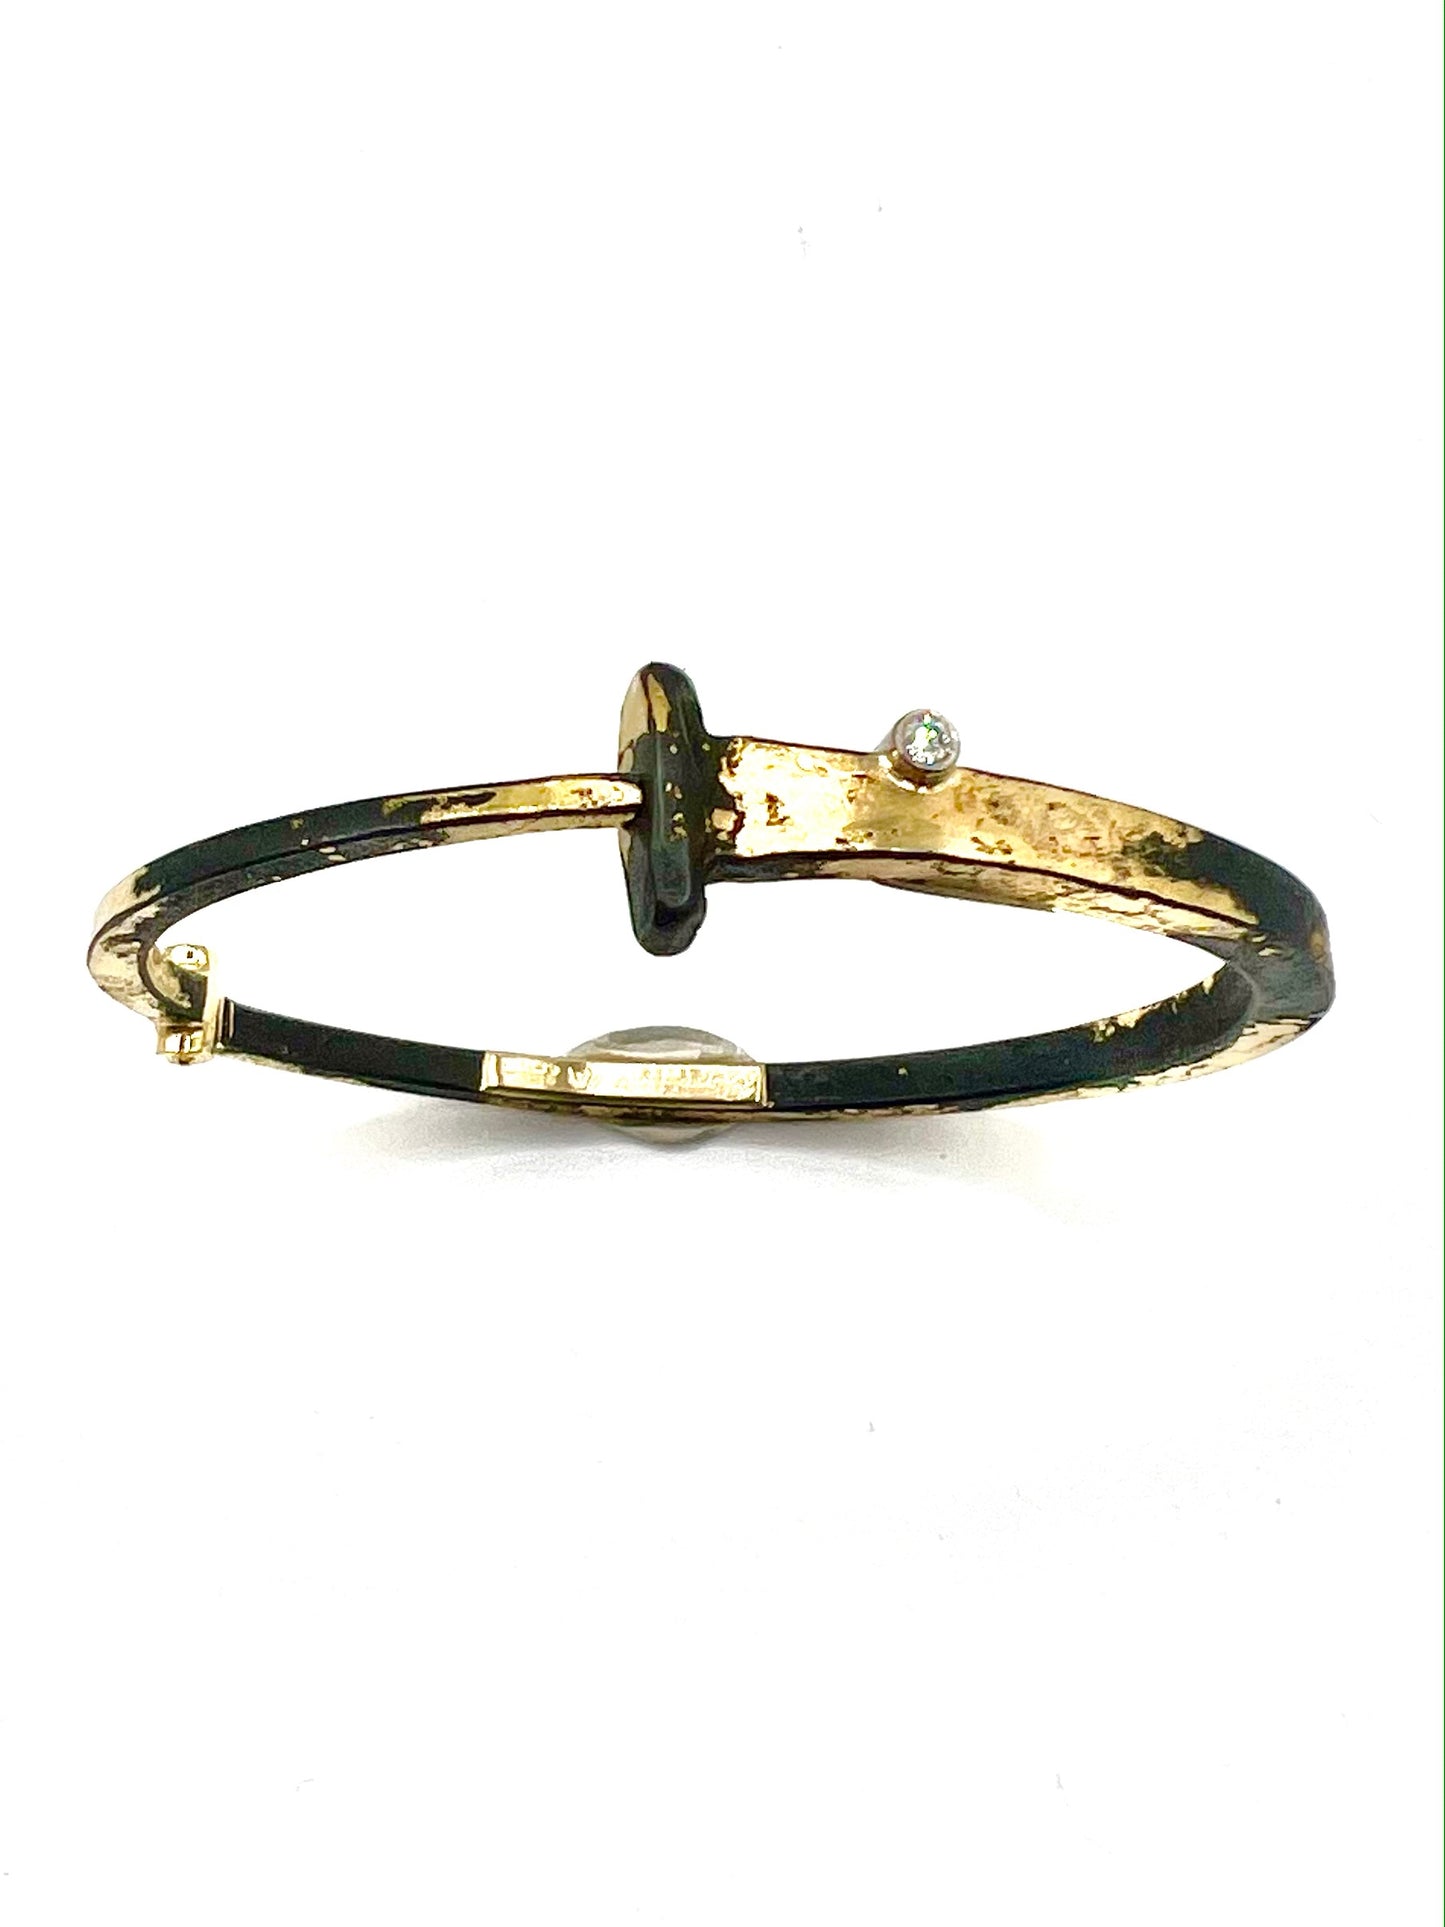 22k and 18k Gold and Iron with Single Diamond Railroad Spike Cuff